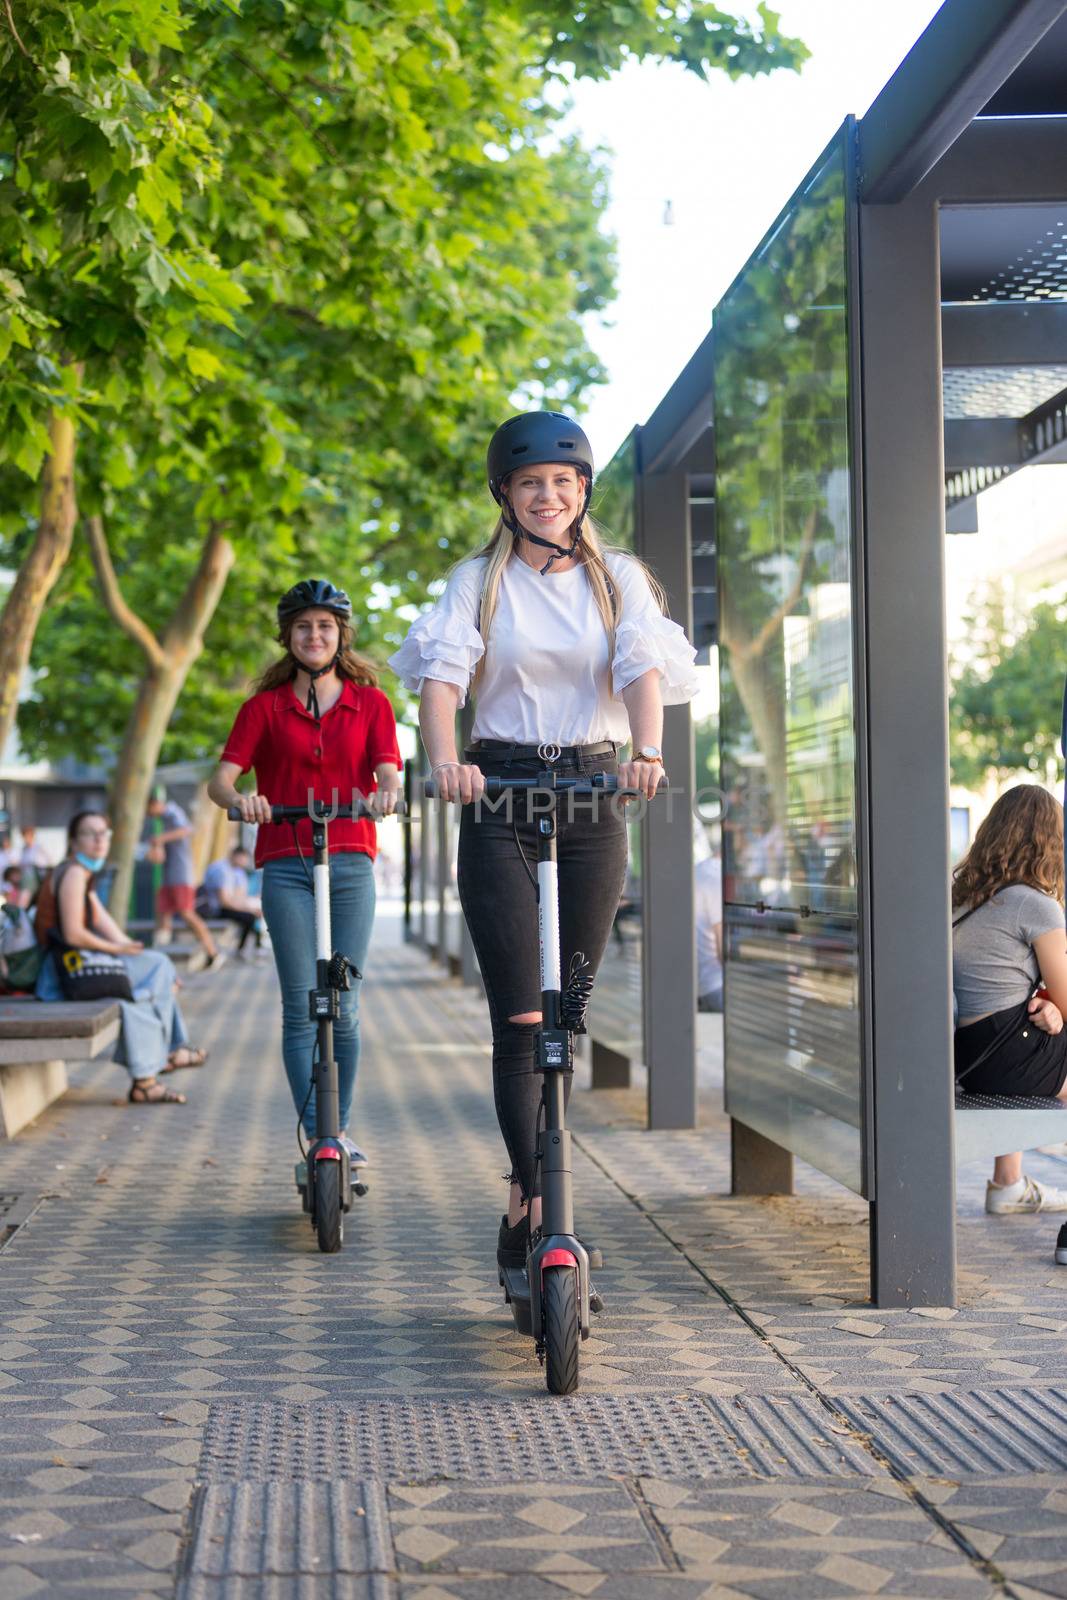 Trendy fashinable teenager girls riding public rental electric scooters in urban city environment. Eco-friendly modern public city transport by kasto